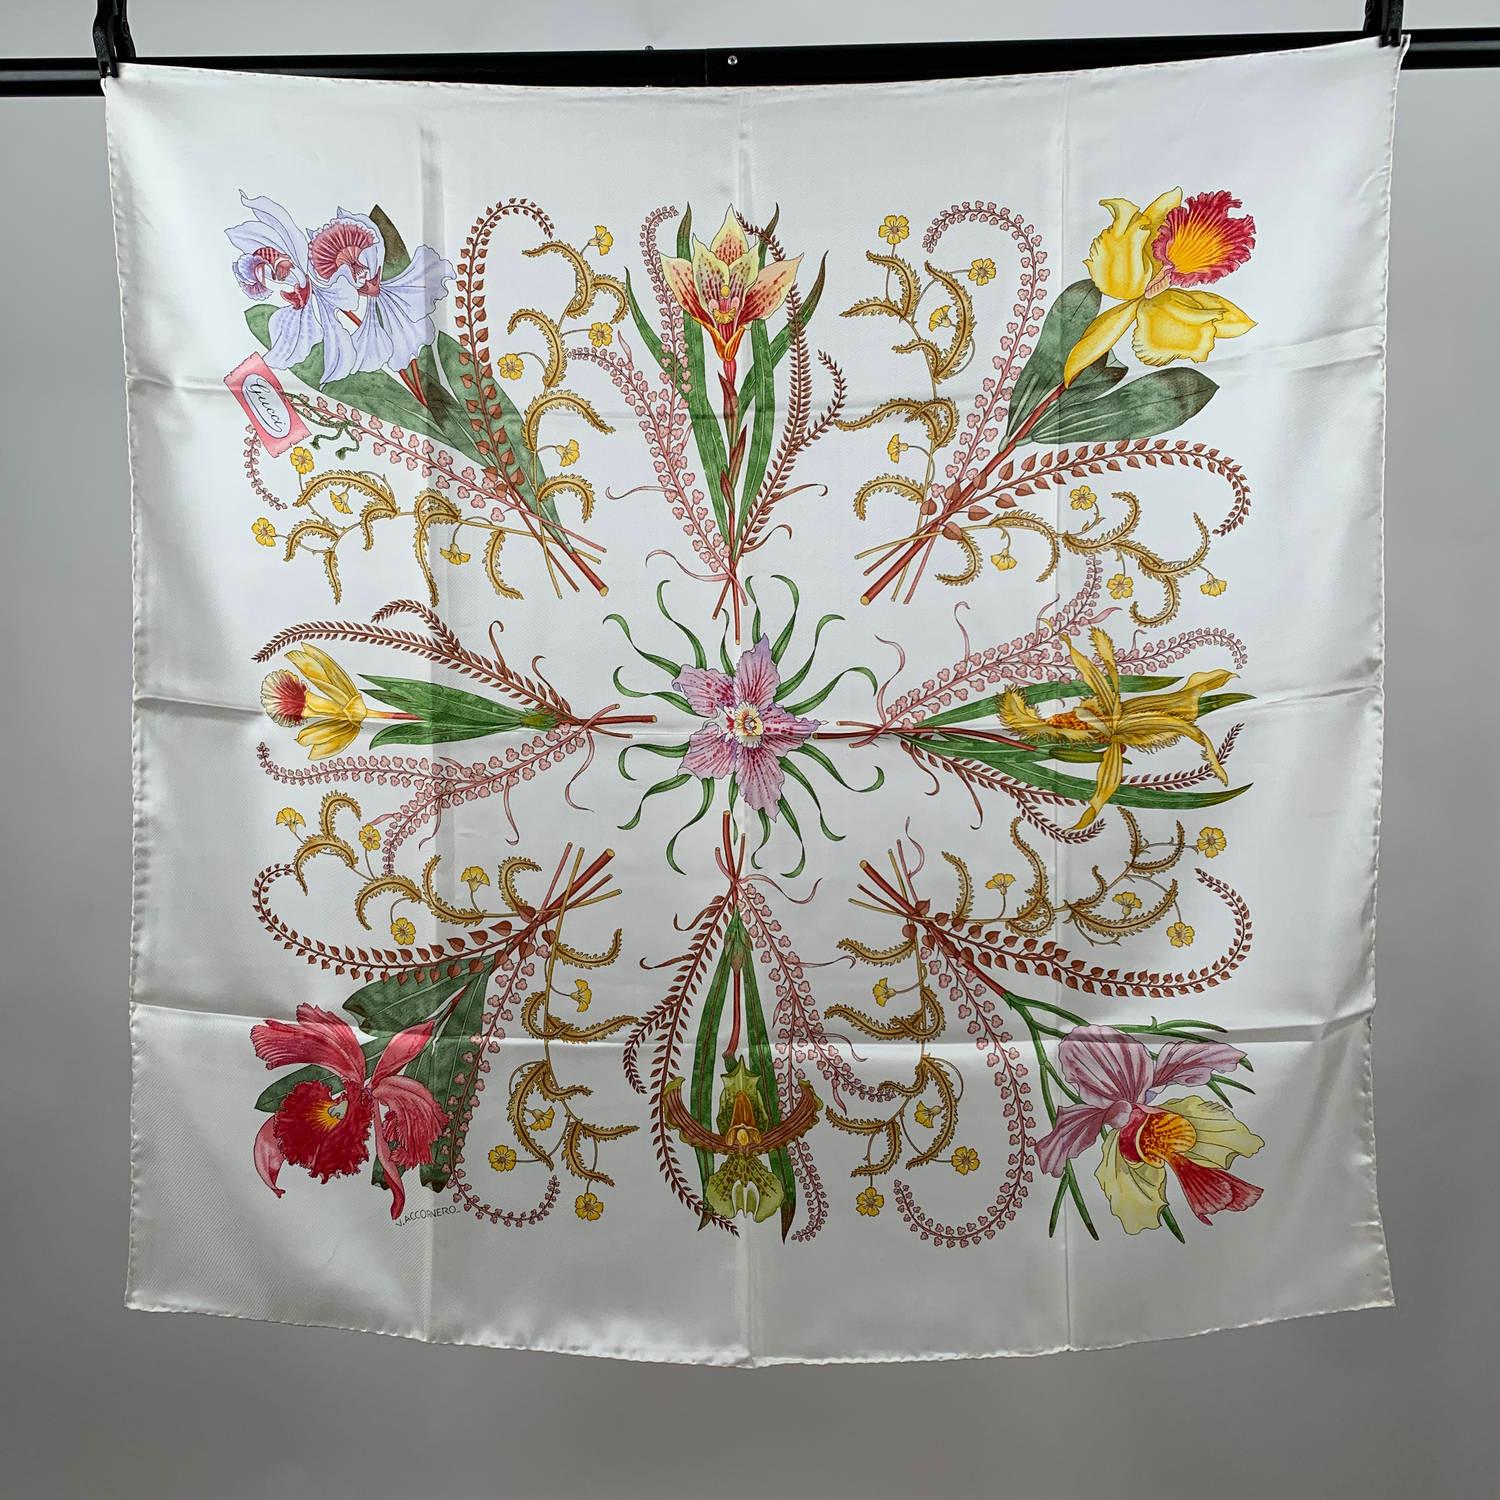 Gucci Vintage 1974 White Silk Scarf Accornero Orchidee Orchids

- Title: 'Orchidee' (Orchids) - Designed by Vittorio Accornero for GUCCI in the 1974 - Beautiful and colorful lap  of orchids and ferns of various species, with central flower on a